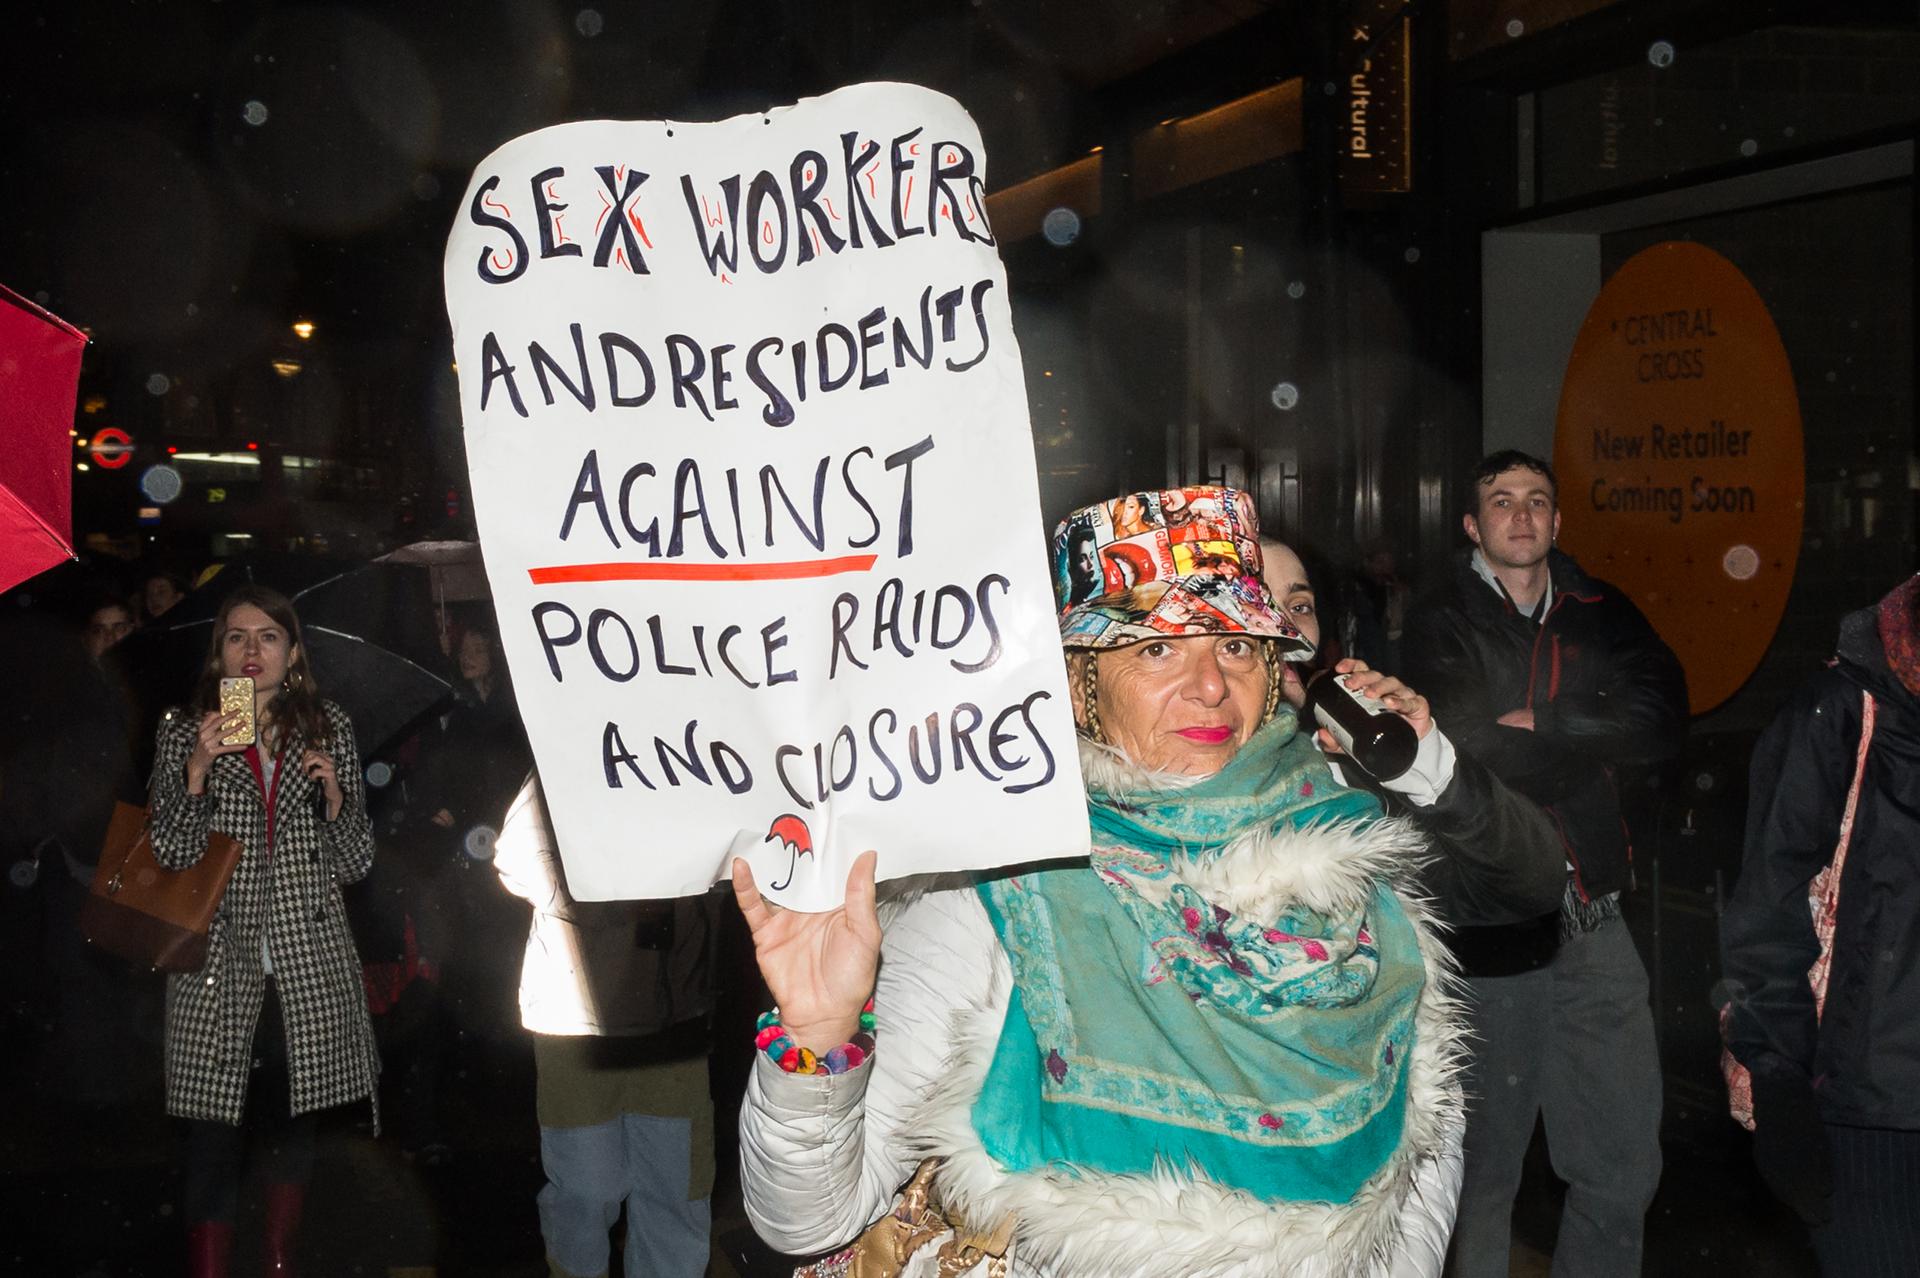 A woman holds a sign that says "Sex workers and residents against police raids and closures."